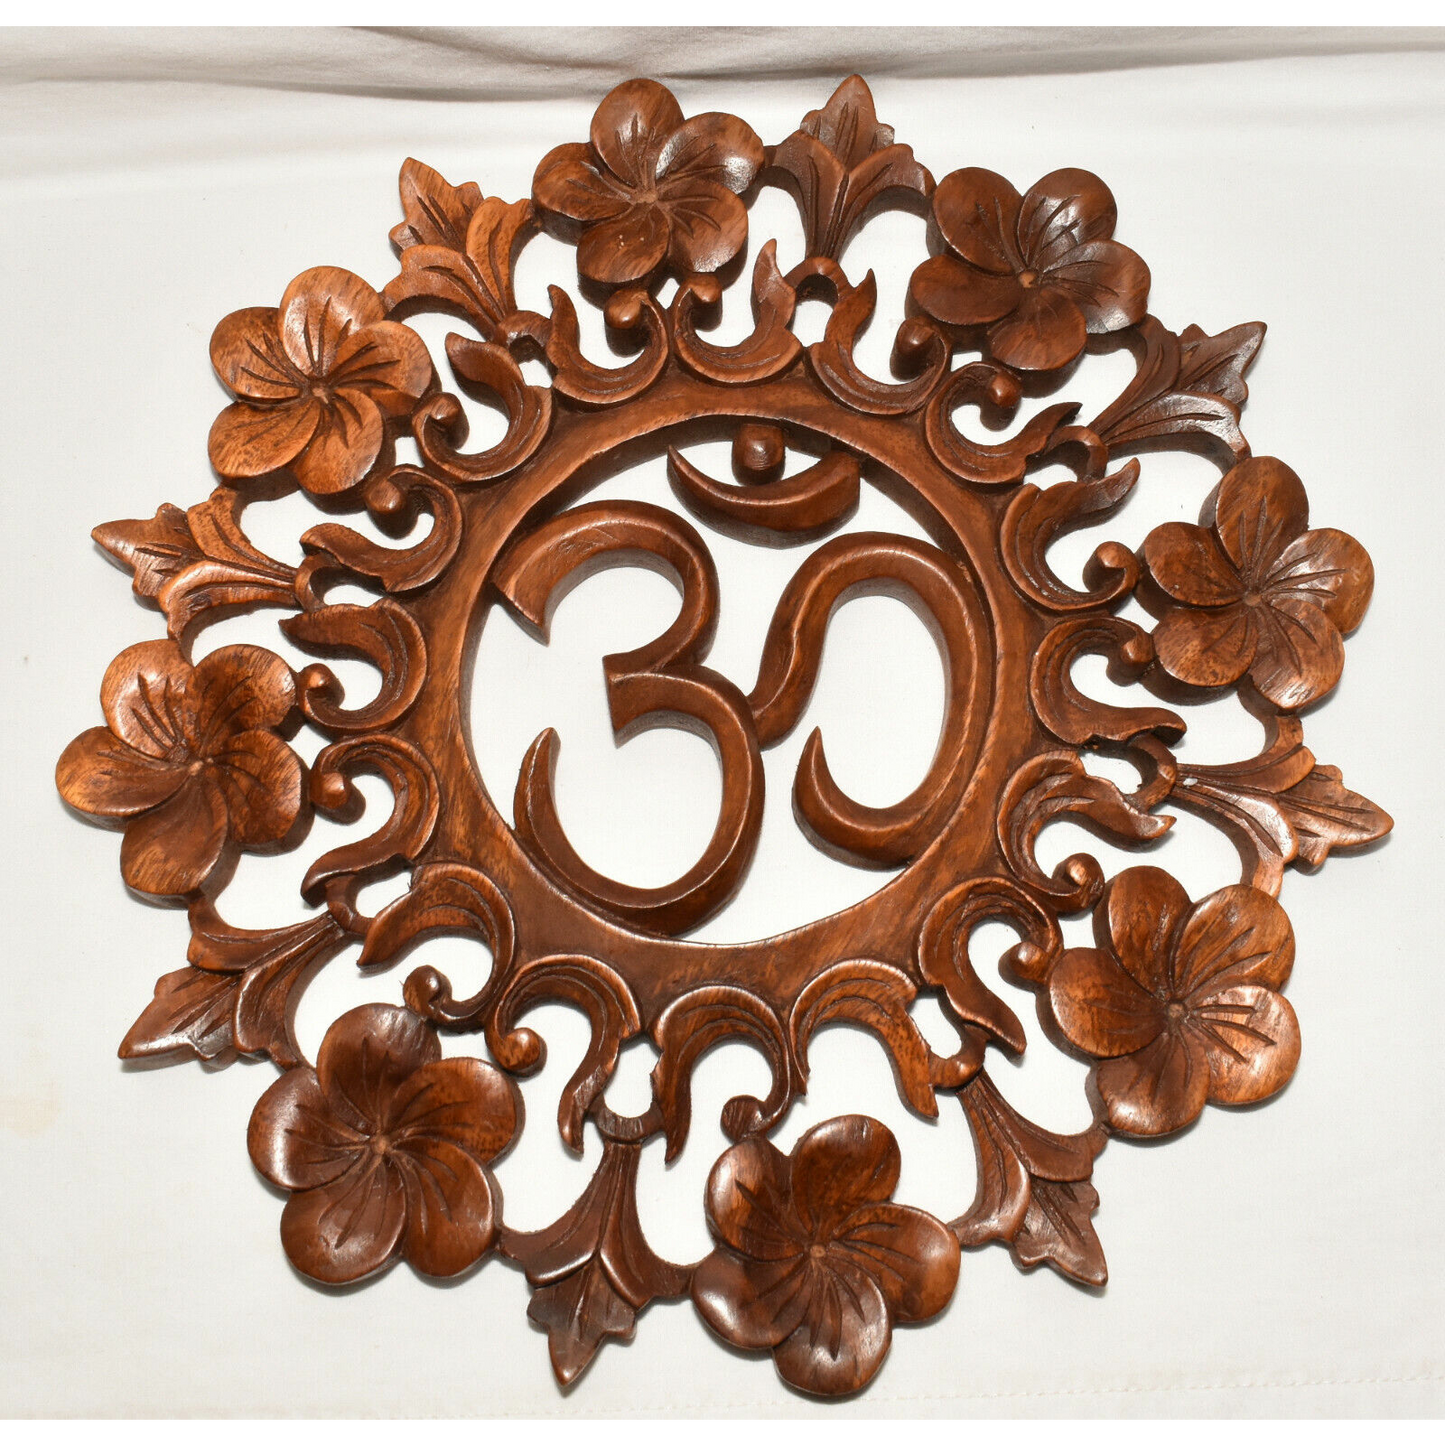 Indonesian Hindu Om Plaque Hand Carved Wood Wall Relief Symbol of Divinity